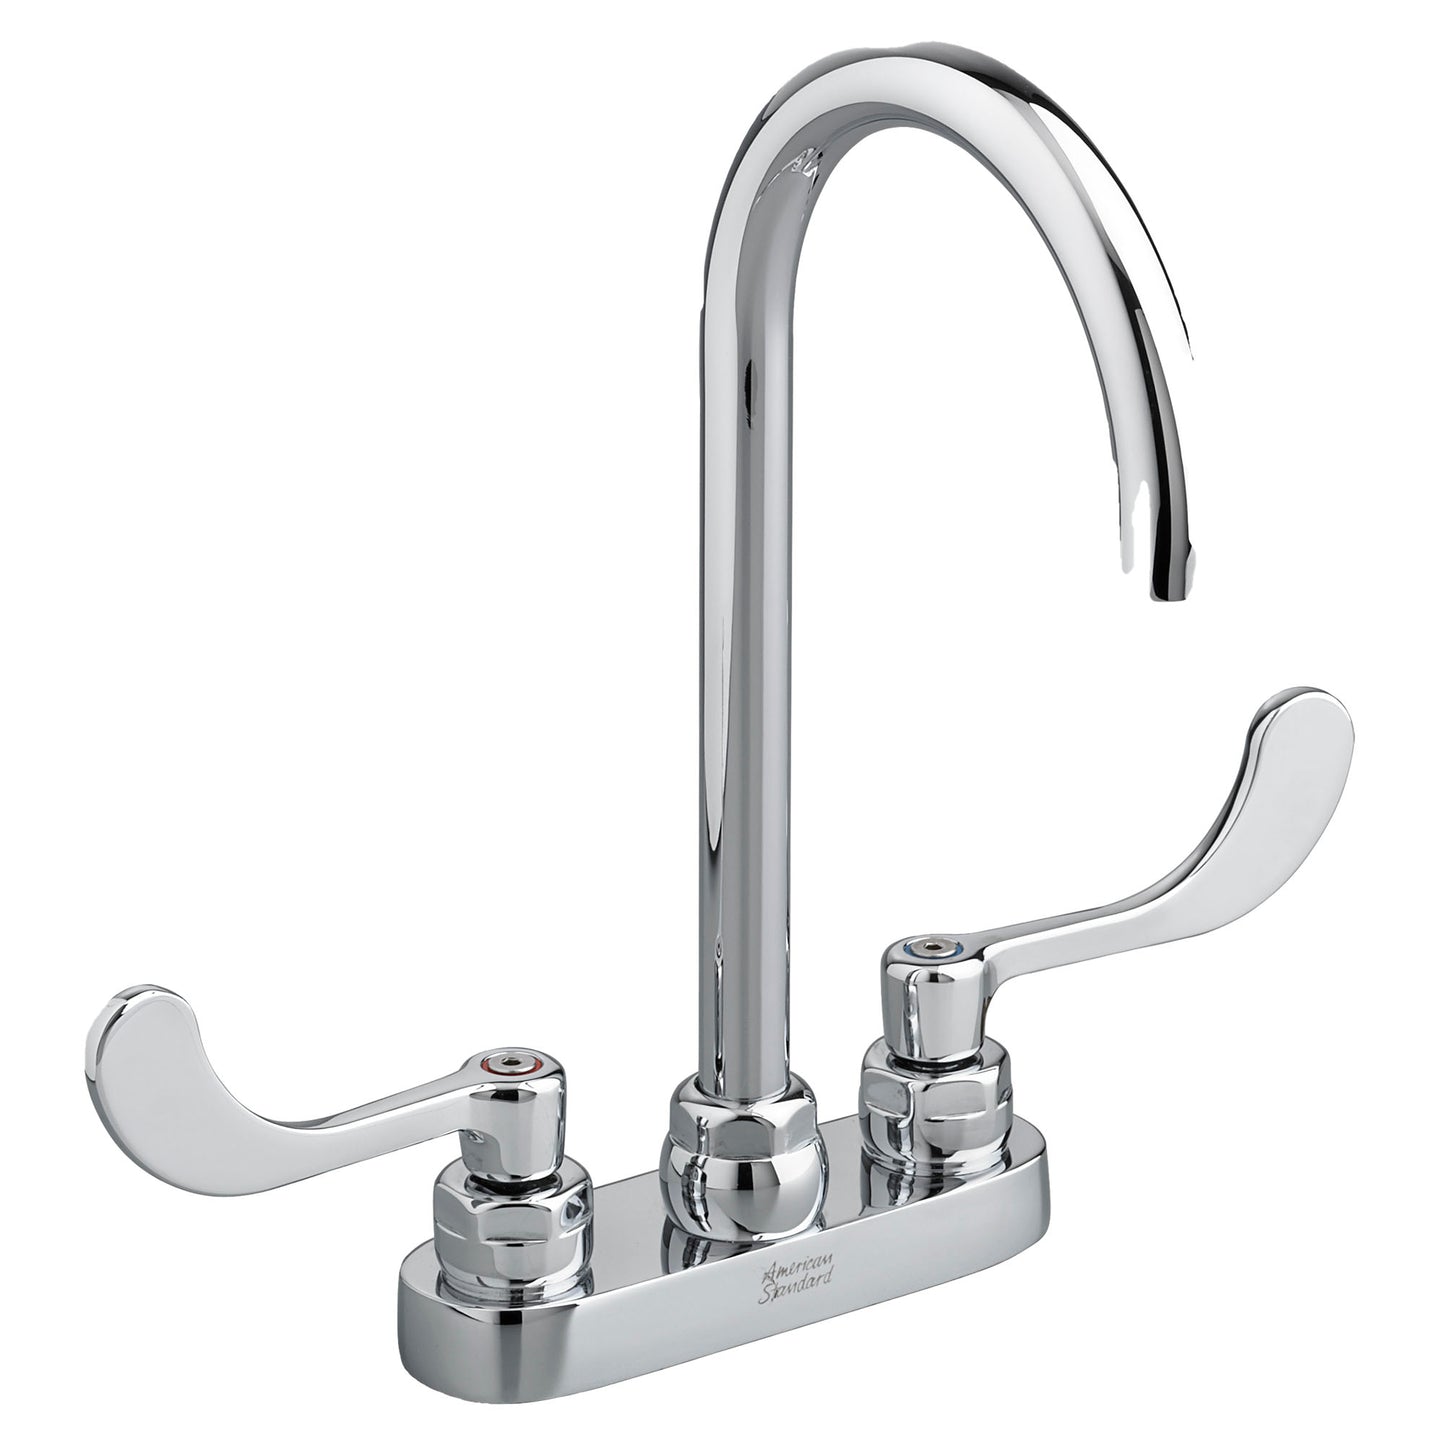 AMERICAN-STANDARD 7500180.002, Monterrey 4-Inch Centerset Gooseneck Faucet With Wrist Blade Handles 1.5 gpm/5.7 Lpm Laminar Flow in Spout Base in Chrome